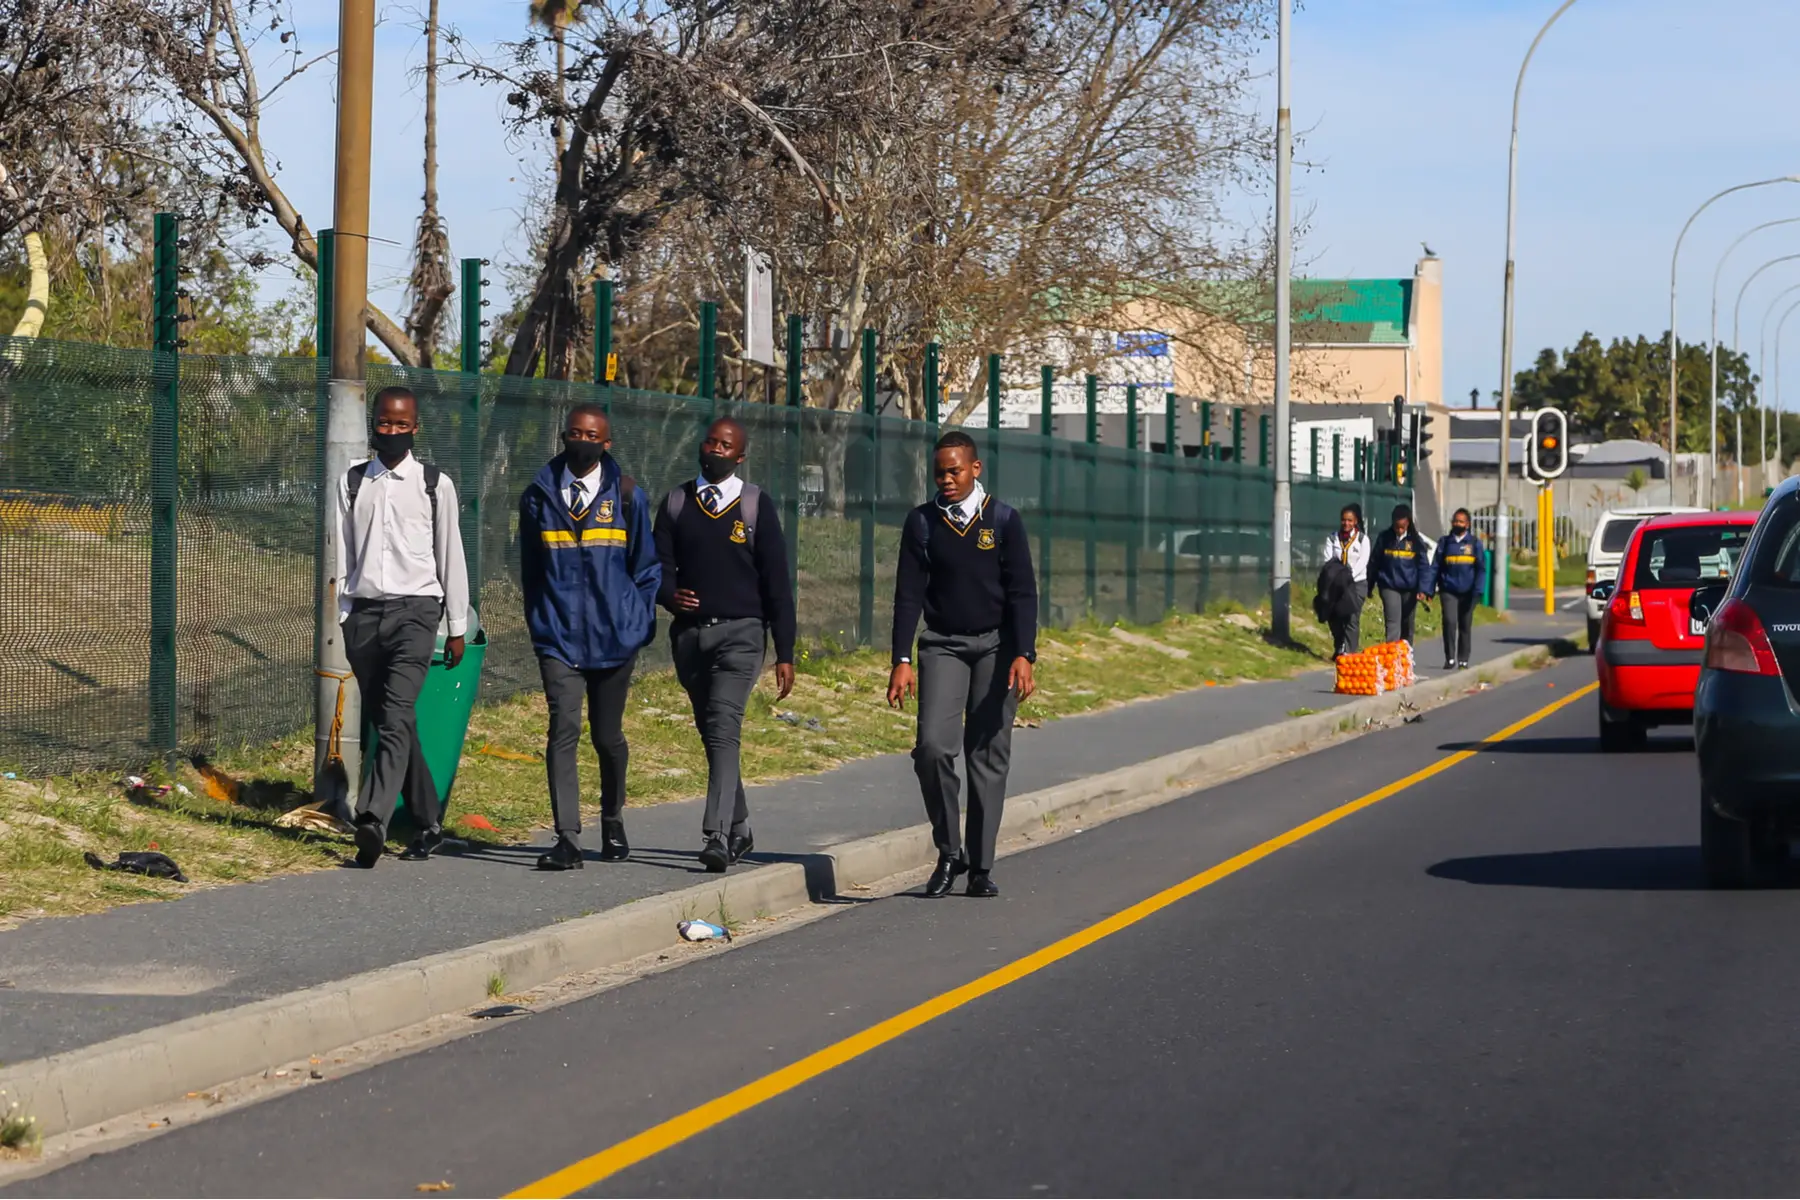 south african students wearing masks